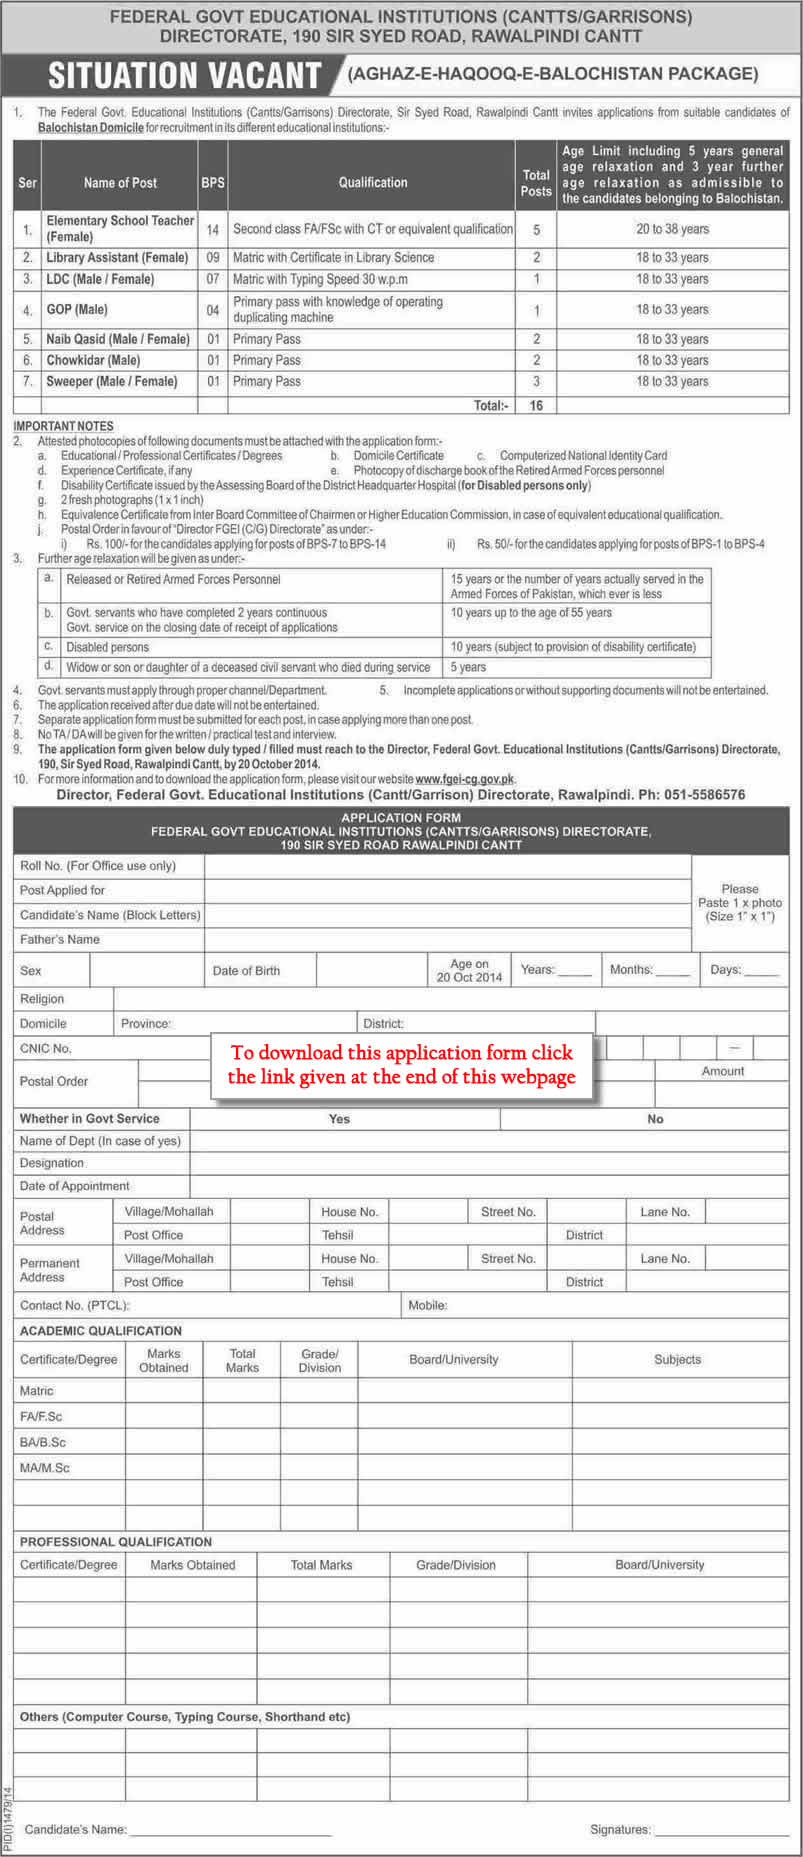 Aghaz-e-Haqooq-e-Balochistan Jobs October 2014 in Federal Government Educational Institutions